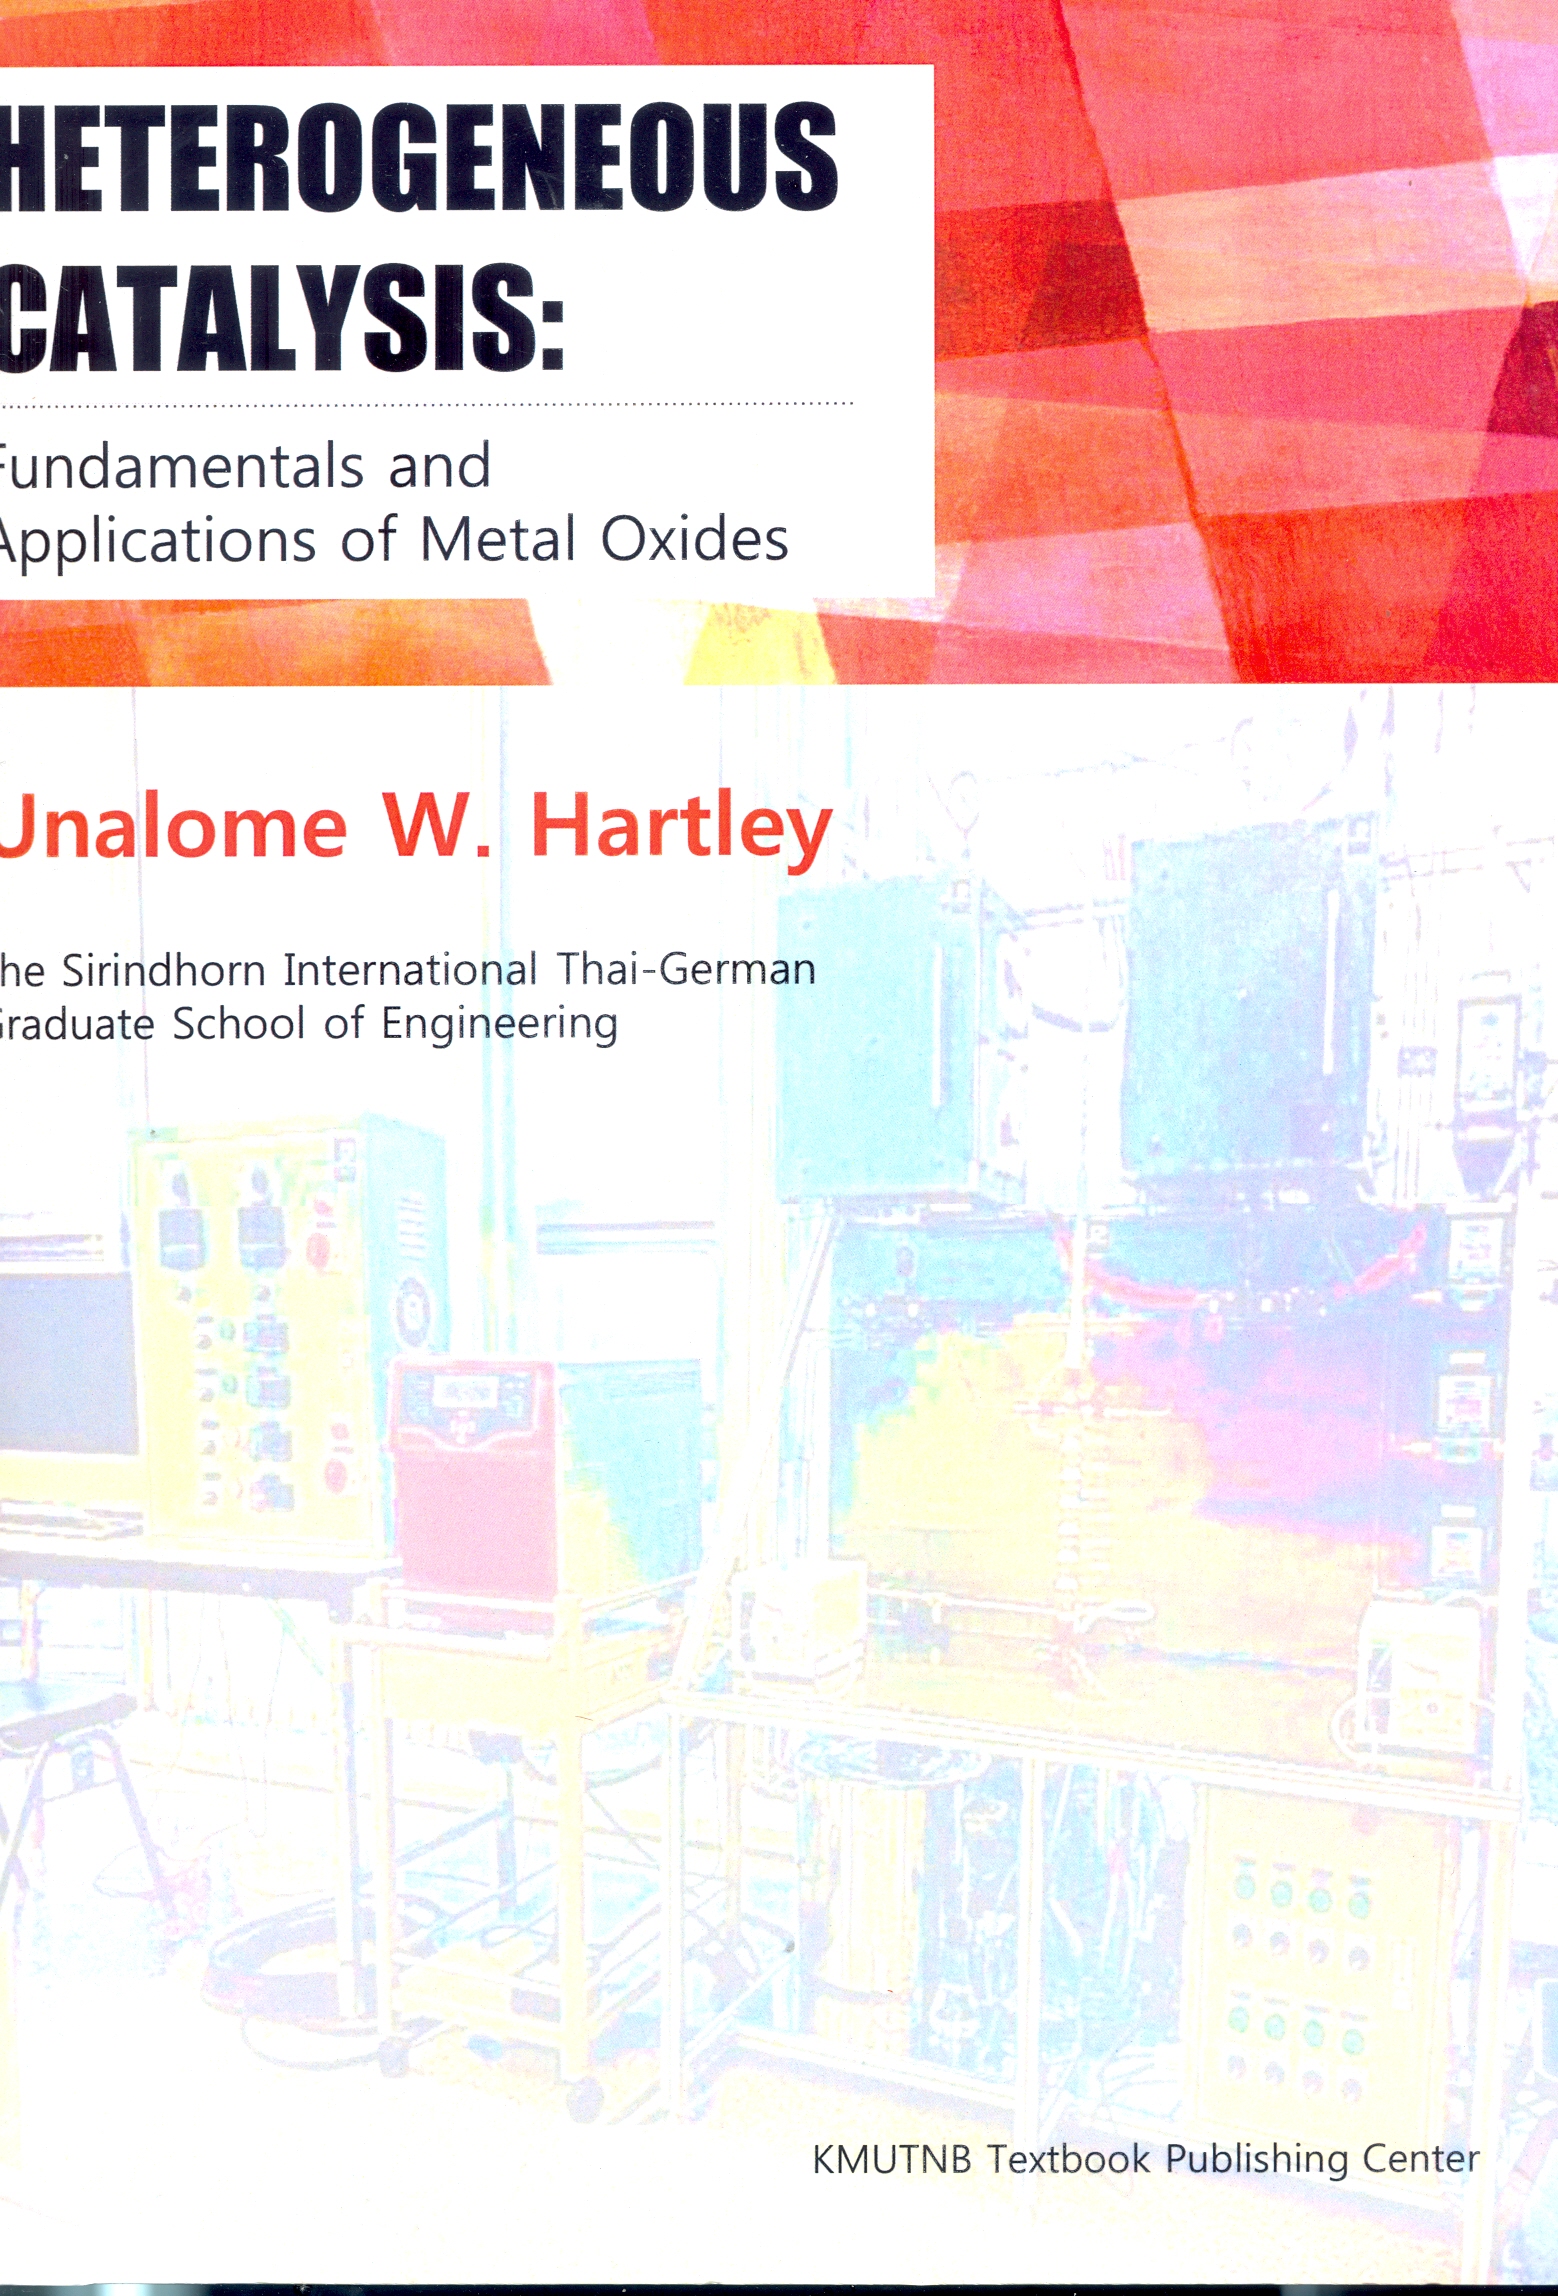 Heterogeneous catalysis : fundamentals and applications of metal oxides